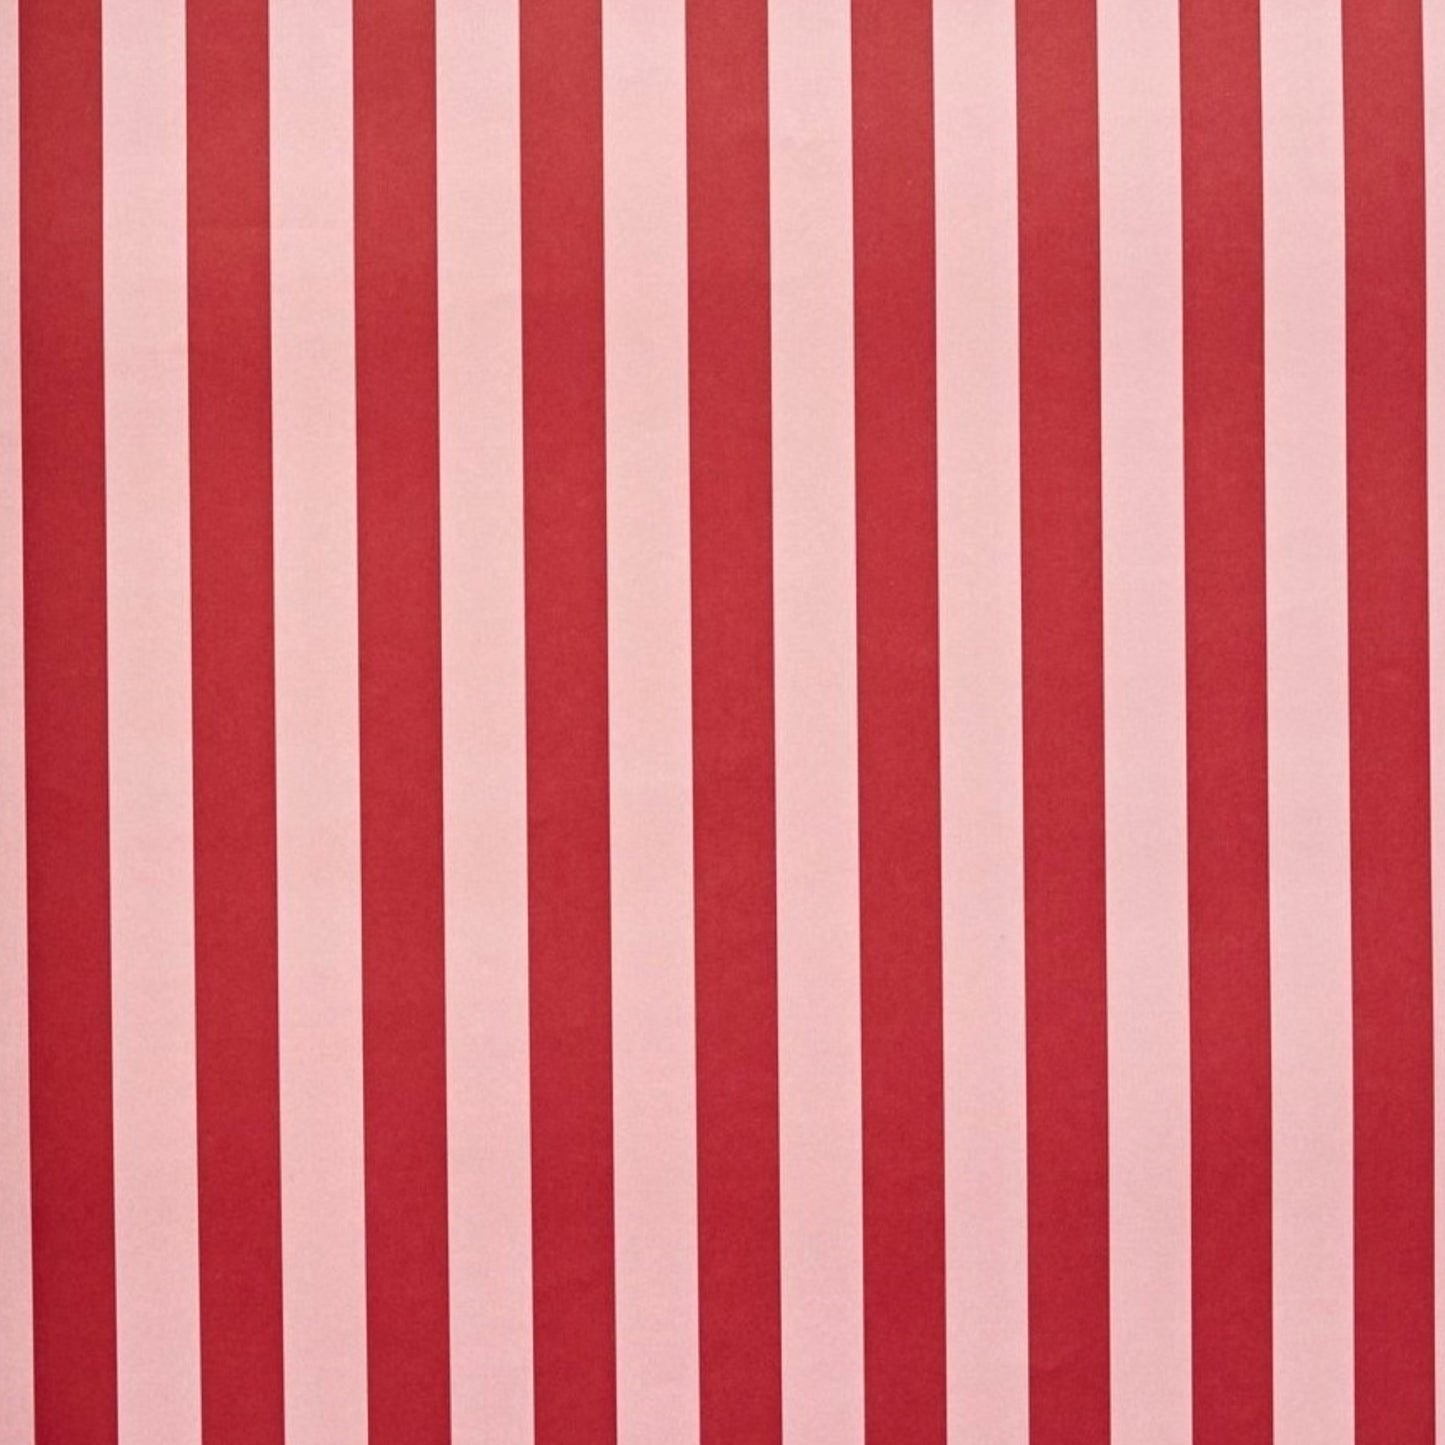 wide classic stripe wrapping paper in red and pink by Heather Evelyn